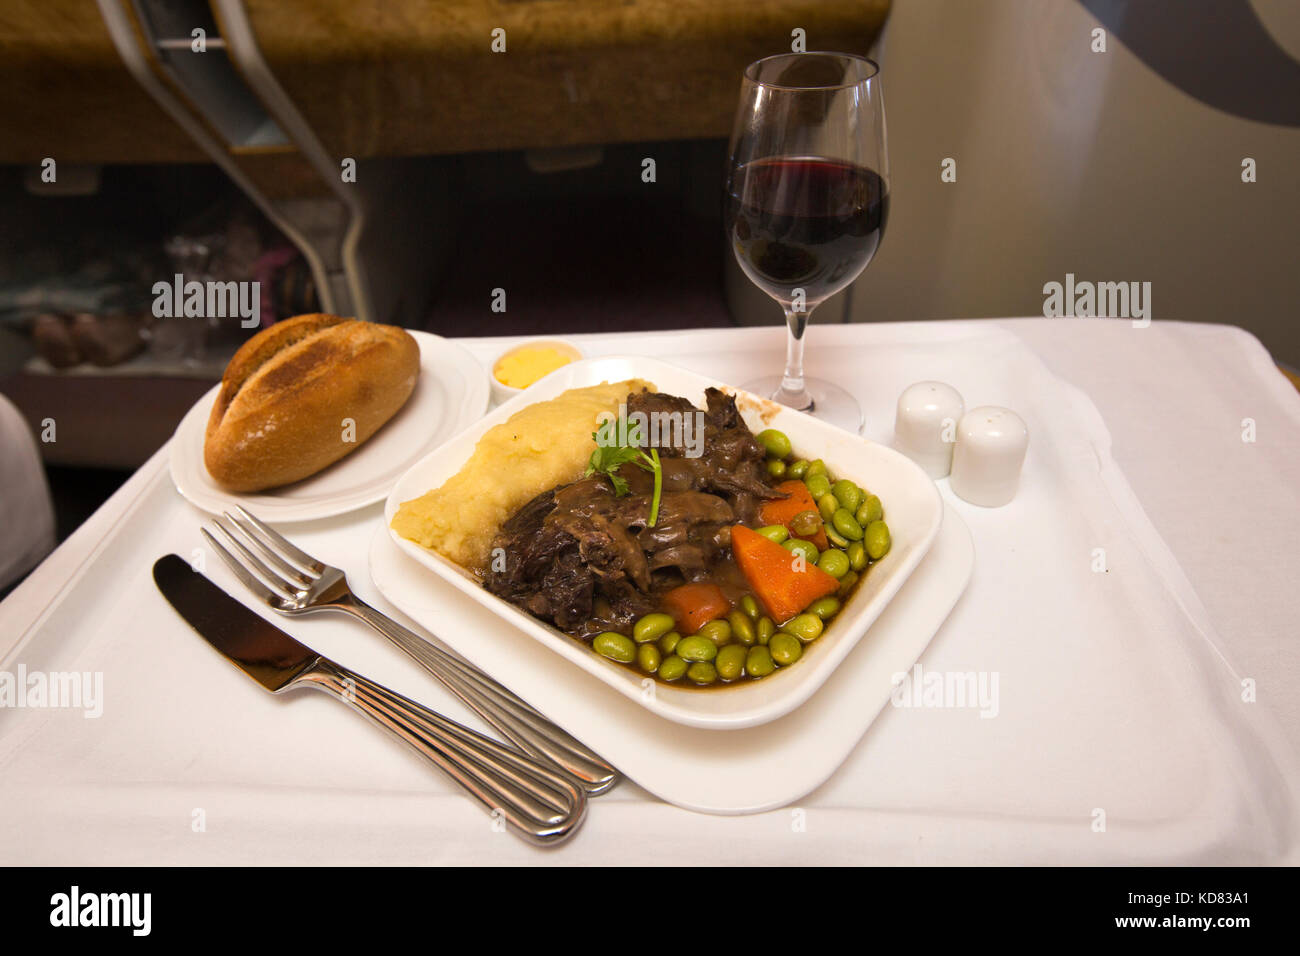 Air Travel Emirates Airlines Business Class food, meal of lamb shank, with carrot fava beans and potato served in A380 cabin Stock Photo